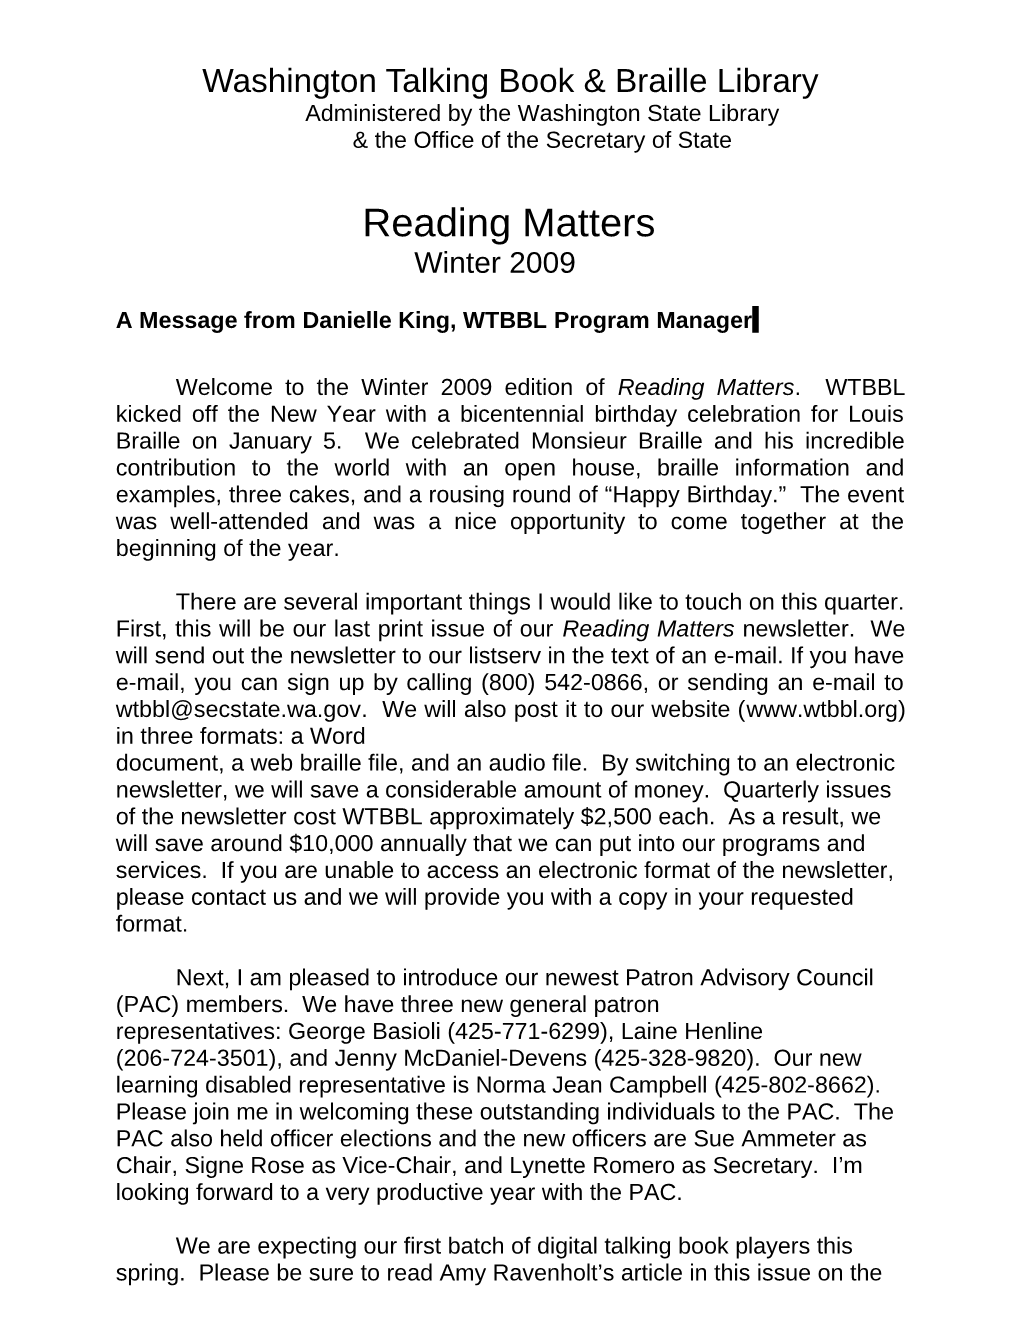 Welcome to the Winter 2009 Edition of Reading Matters